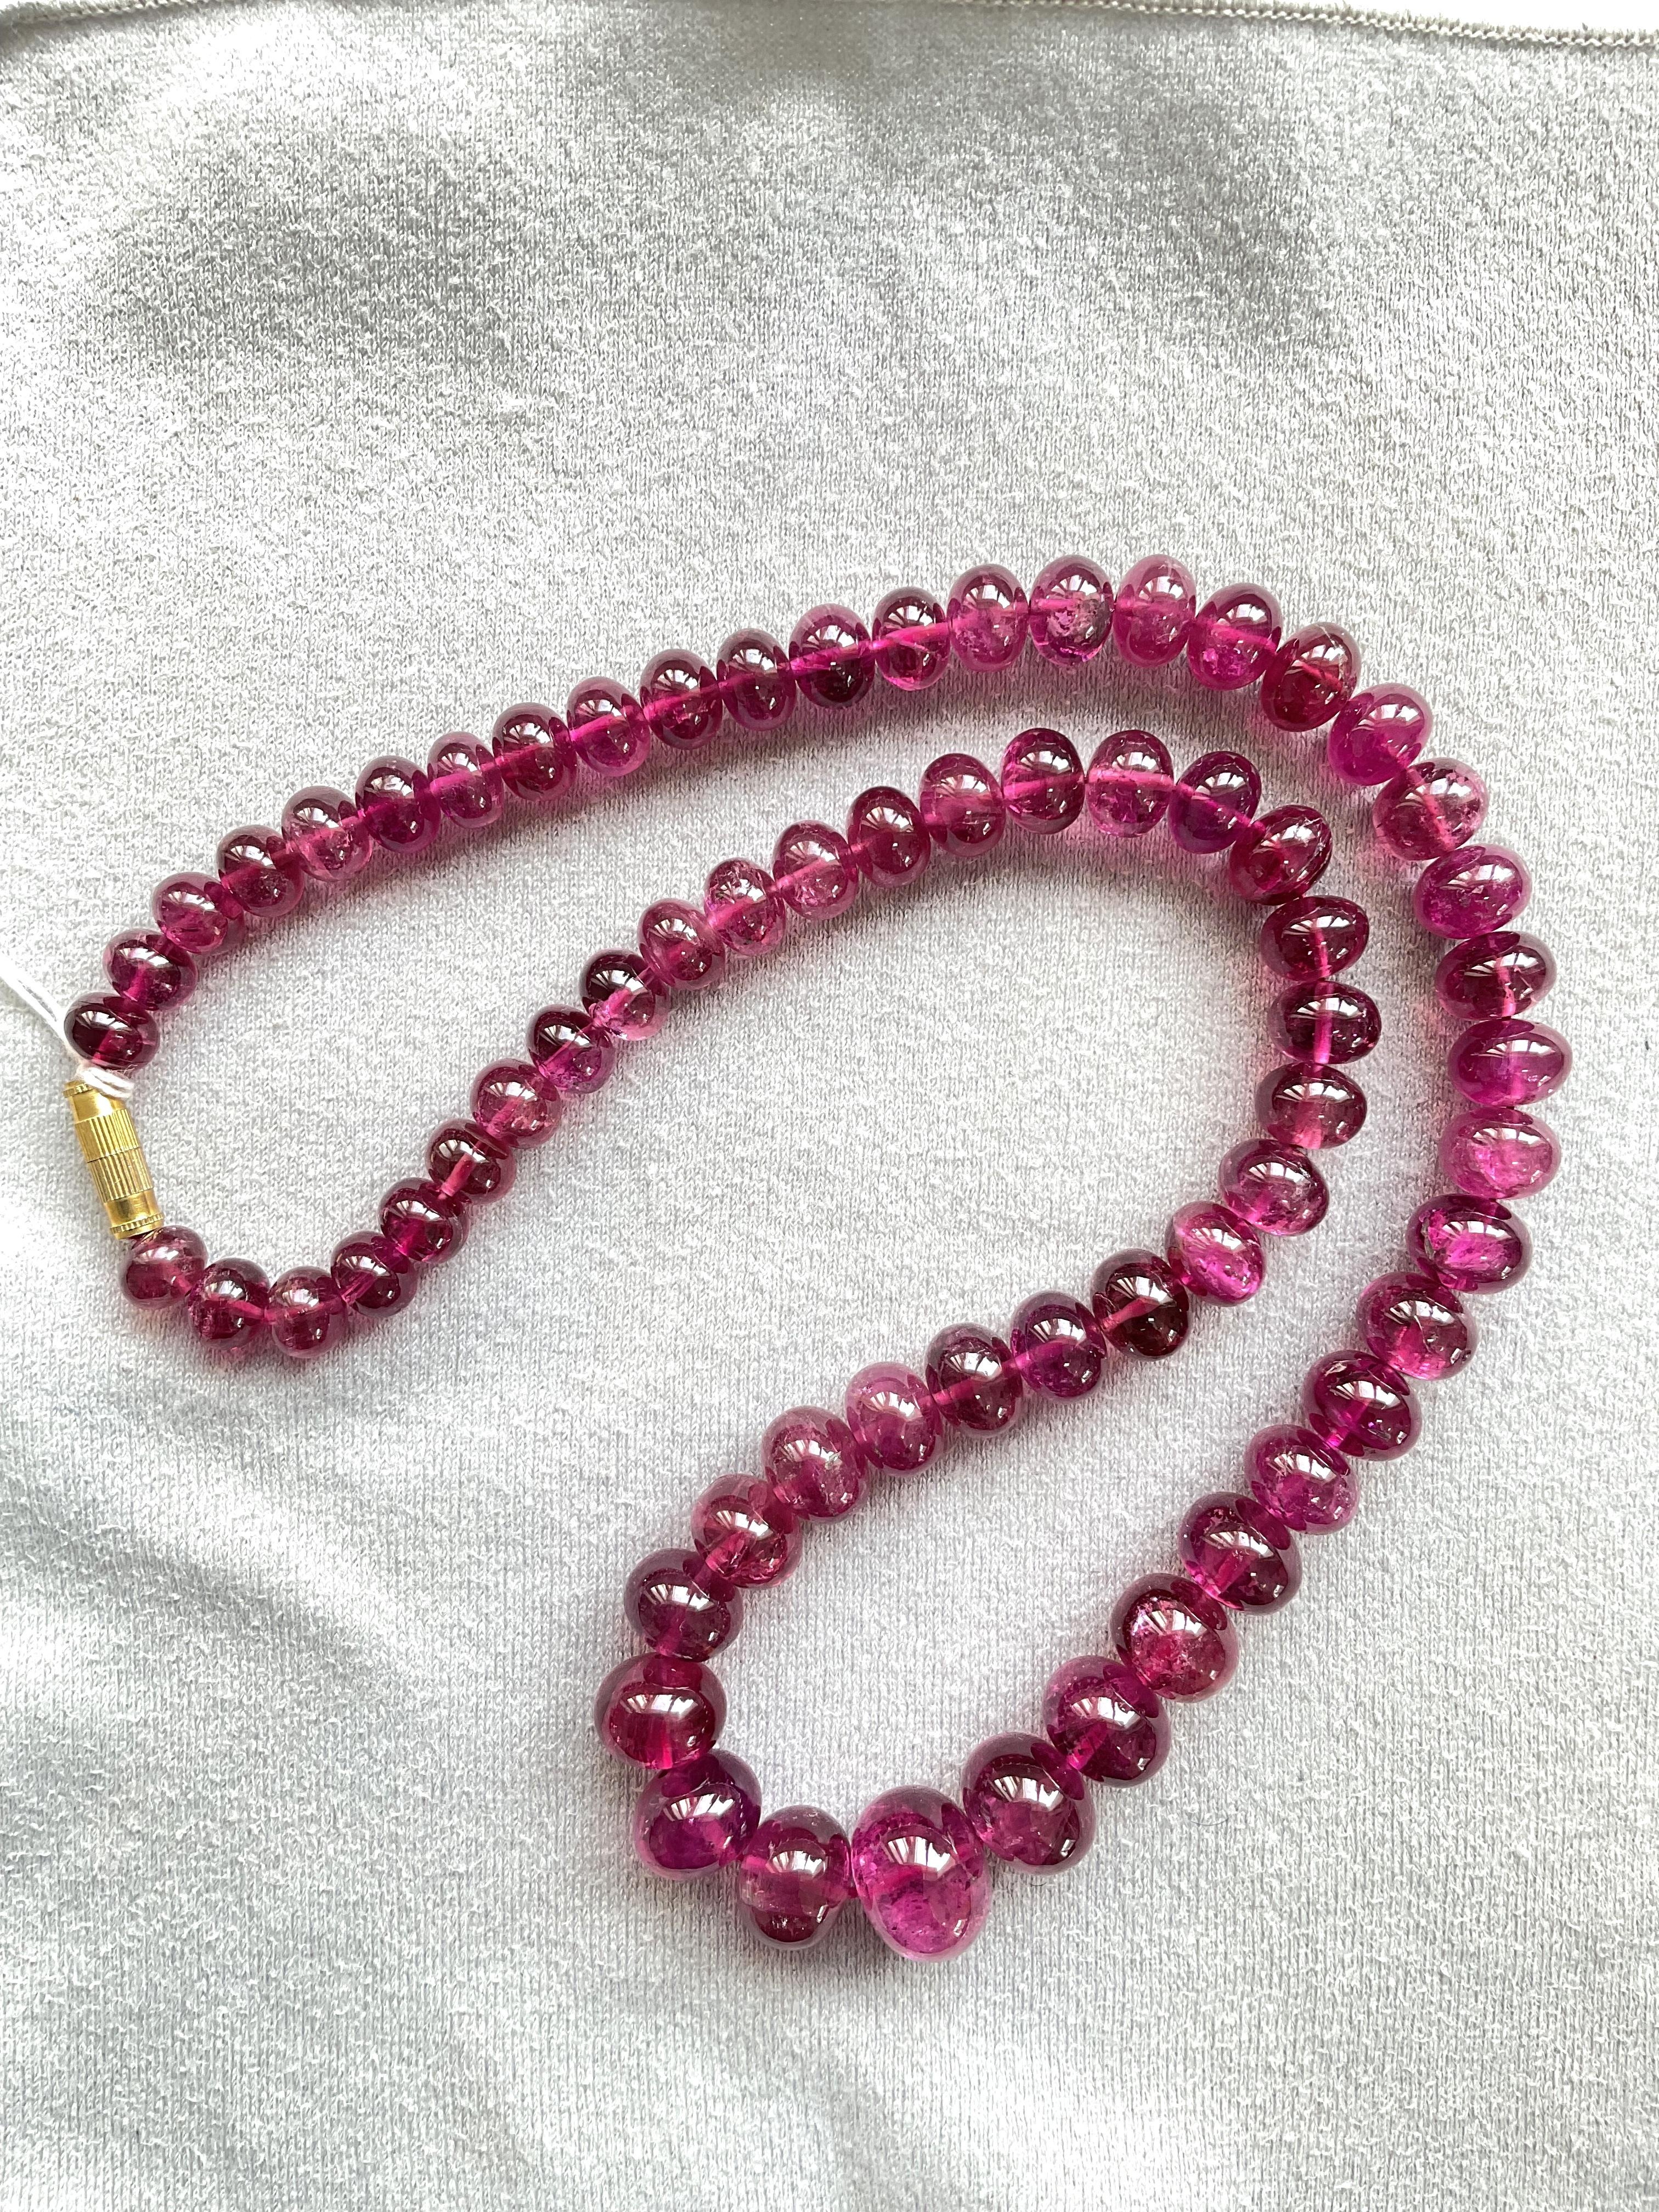 335.00 Carats Rubellite Tourmaline Plain Beads Top Fine Natural gems Jewelry  For Sale 2